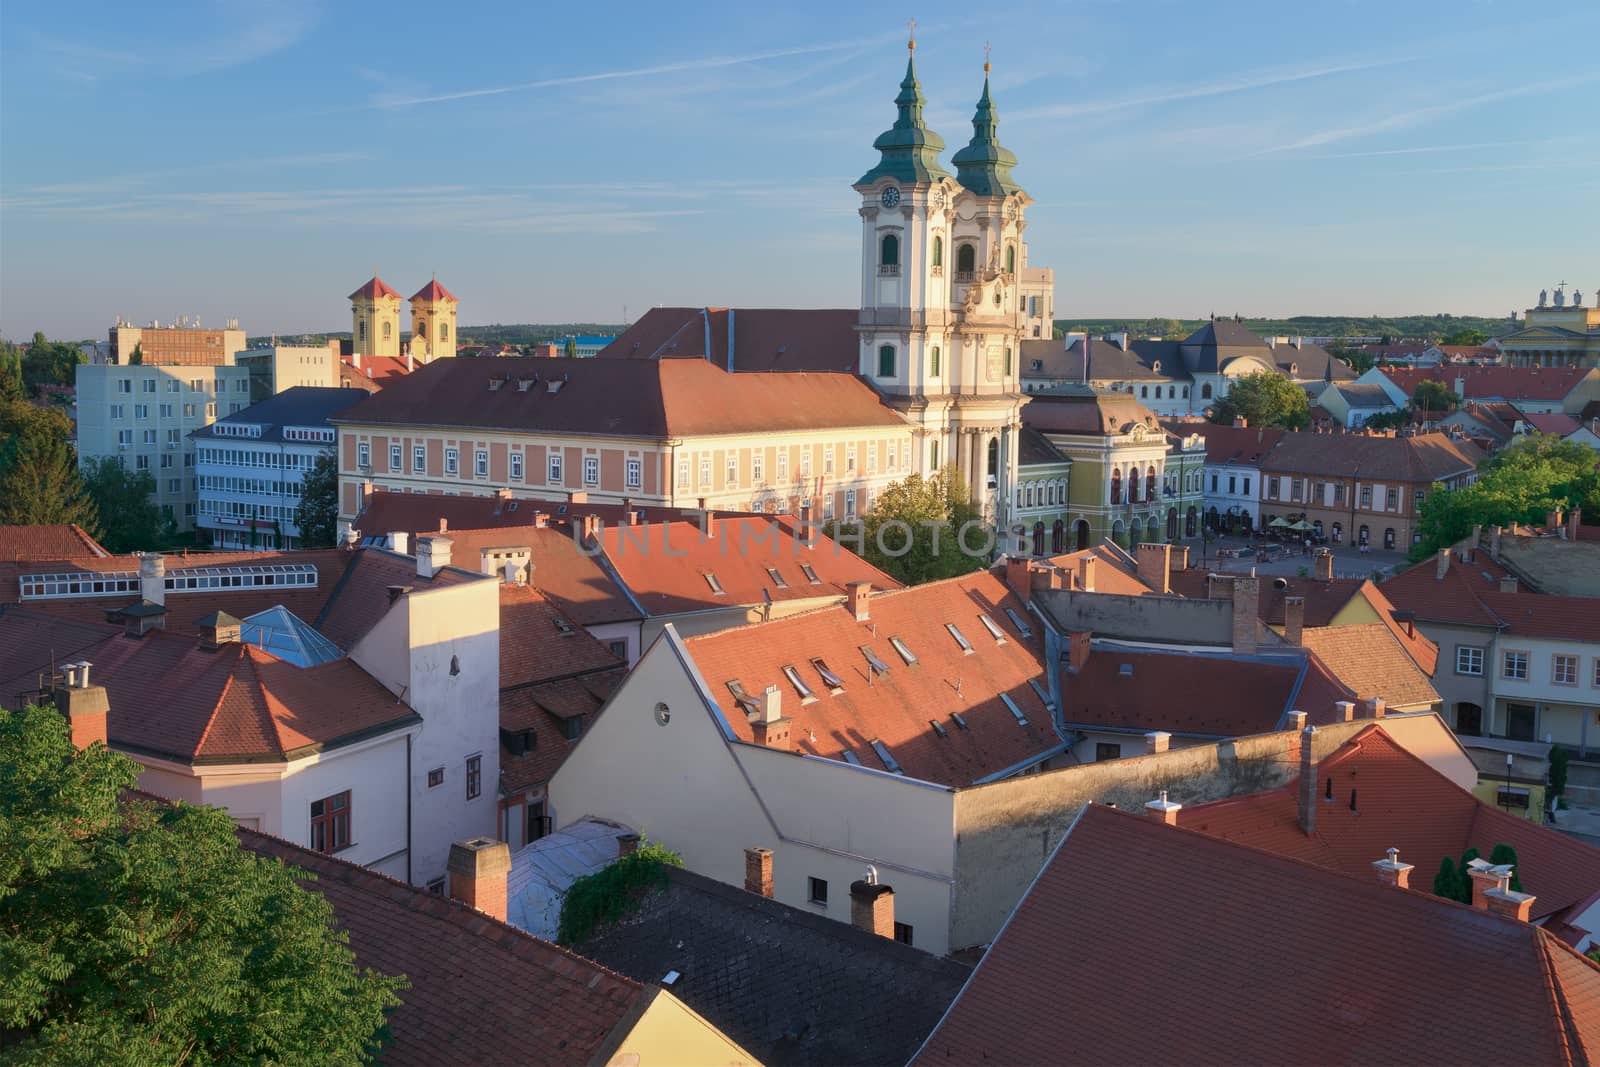 Eger Hungary, one of the largest cities in Hungary. It's famous for producing wine.